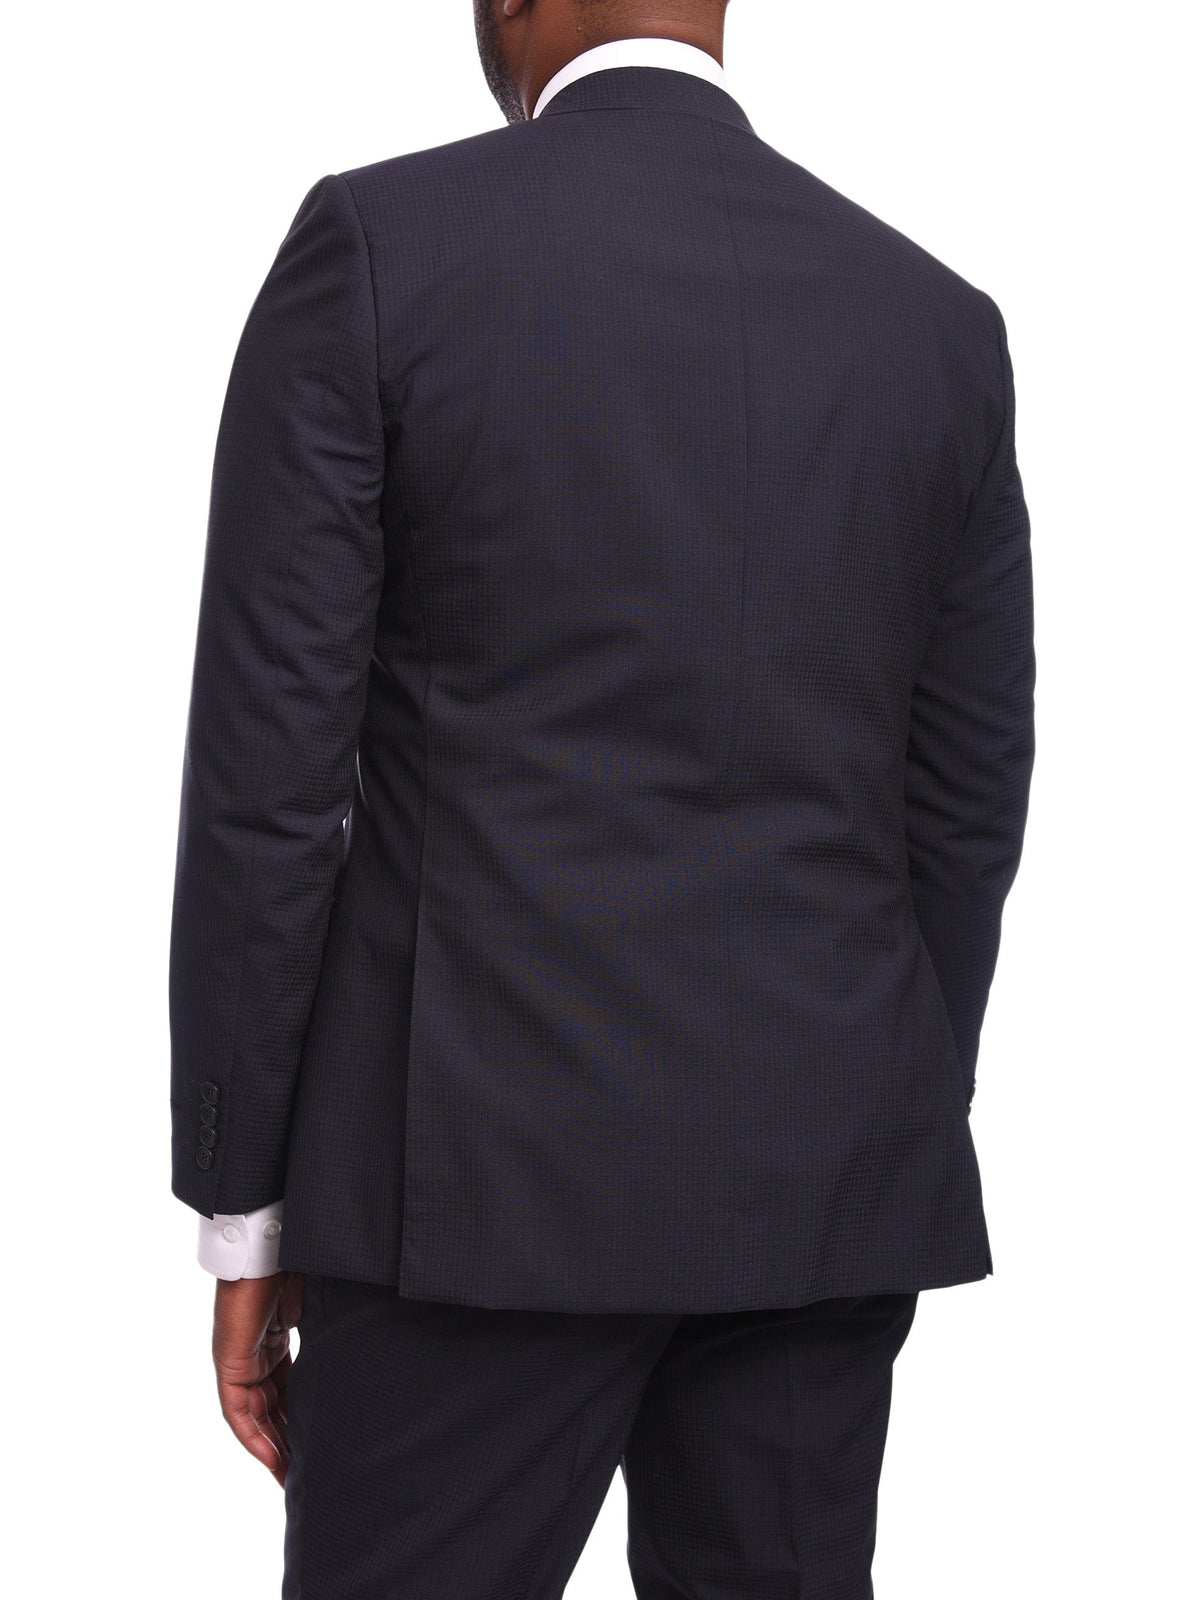 Napoli TWO PIECE SUITS Napoli Slim Fit Navy Blue Tonal Check Half Canvassed Marzotto Wool Suit